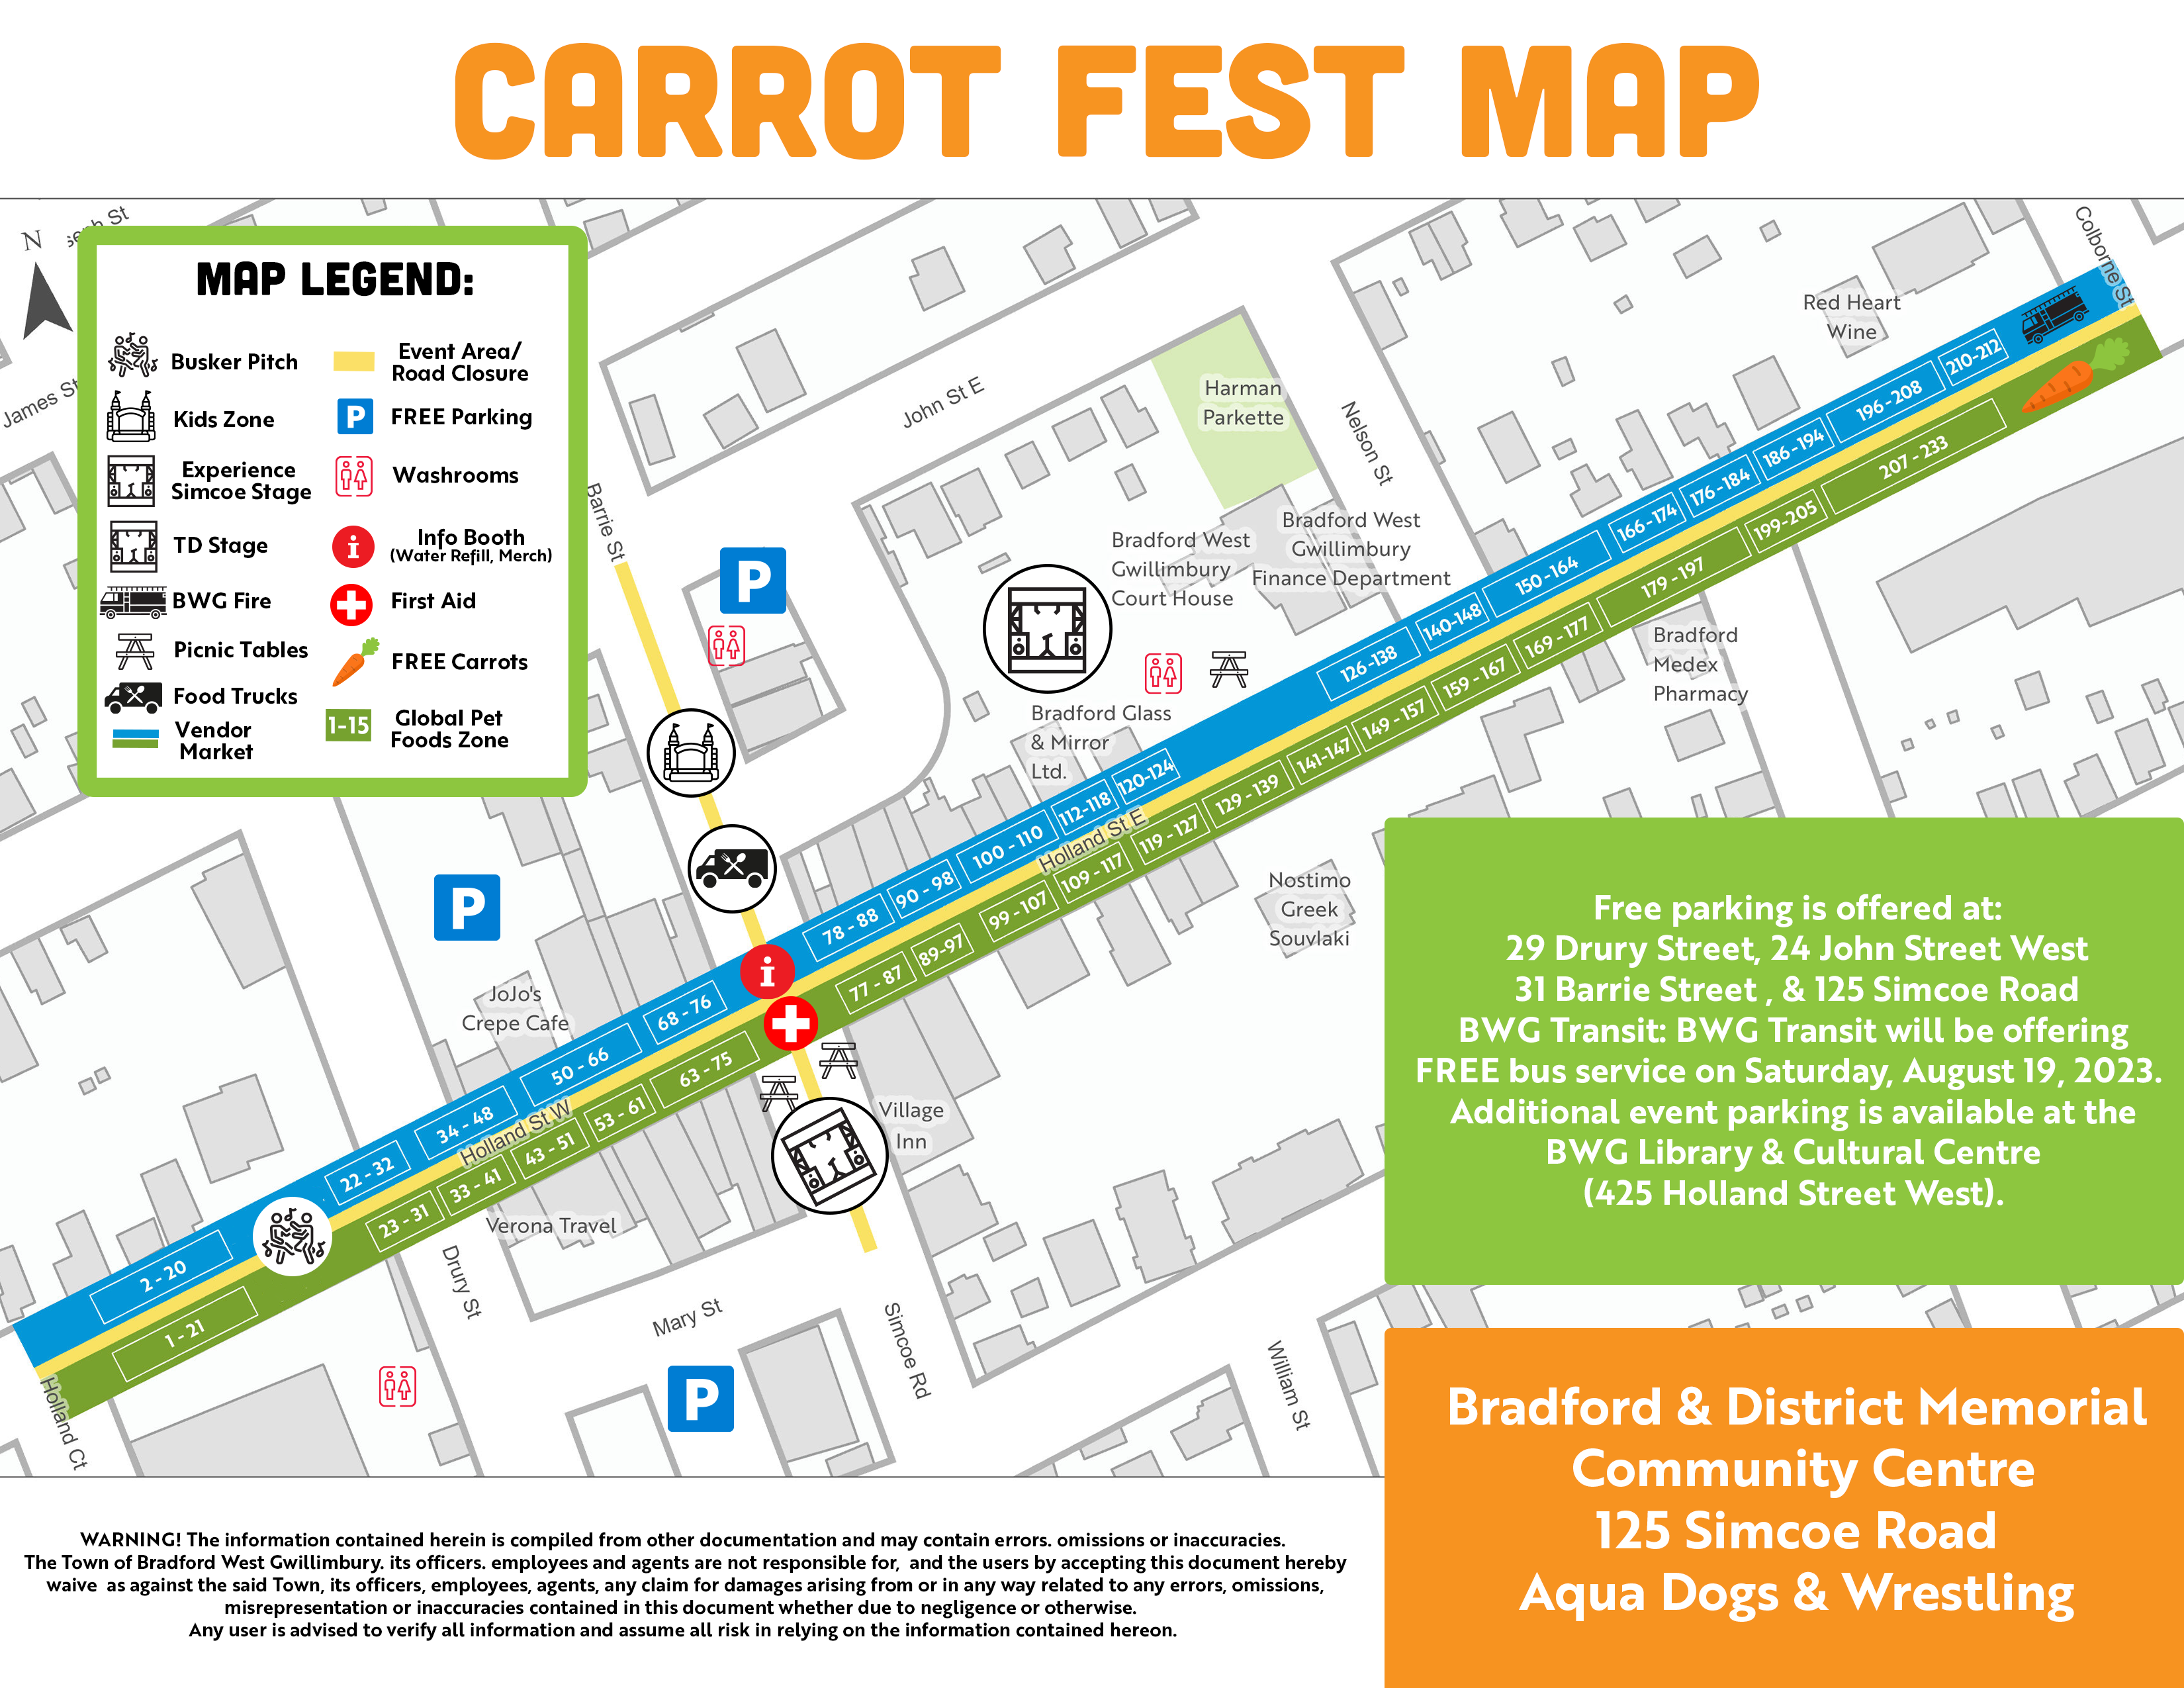 Map of Carrot Fest event area